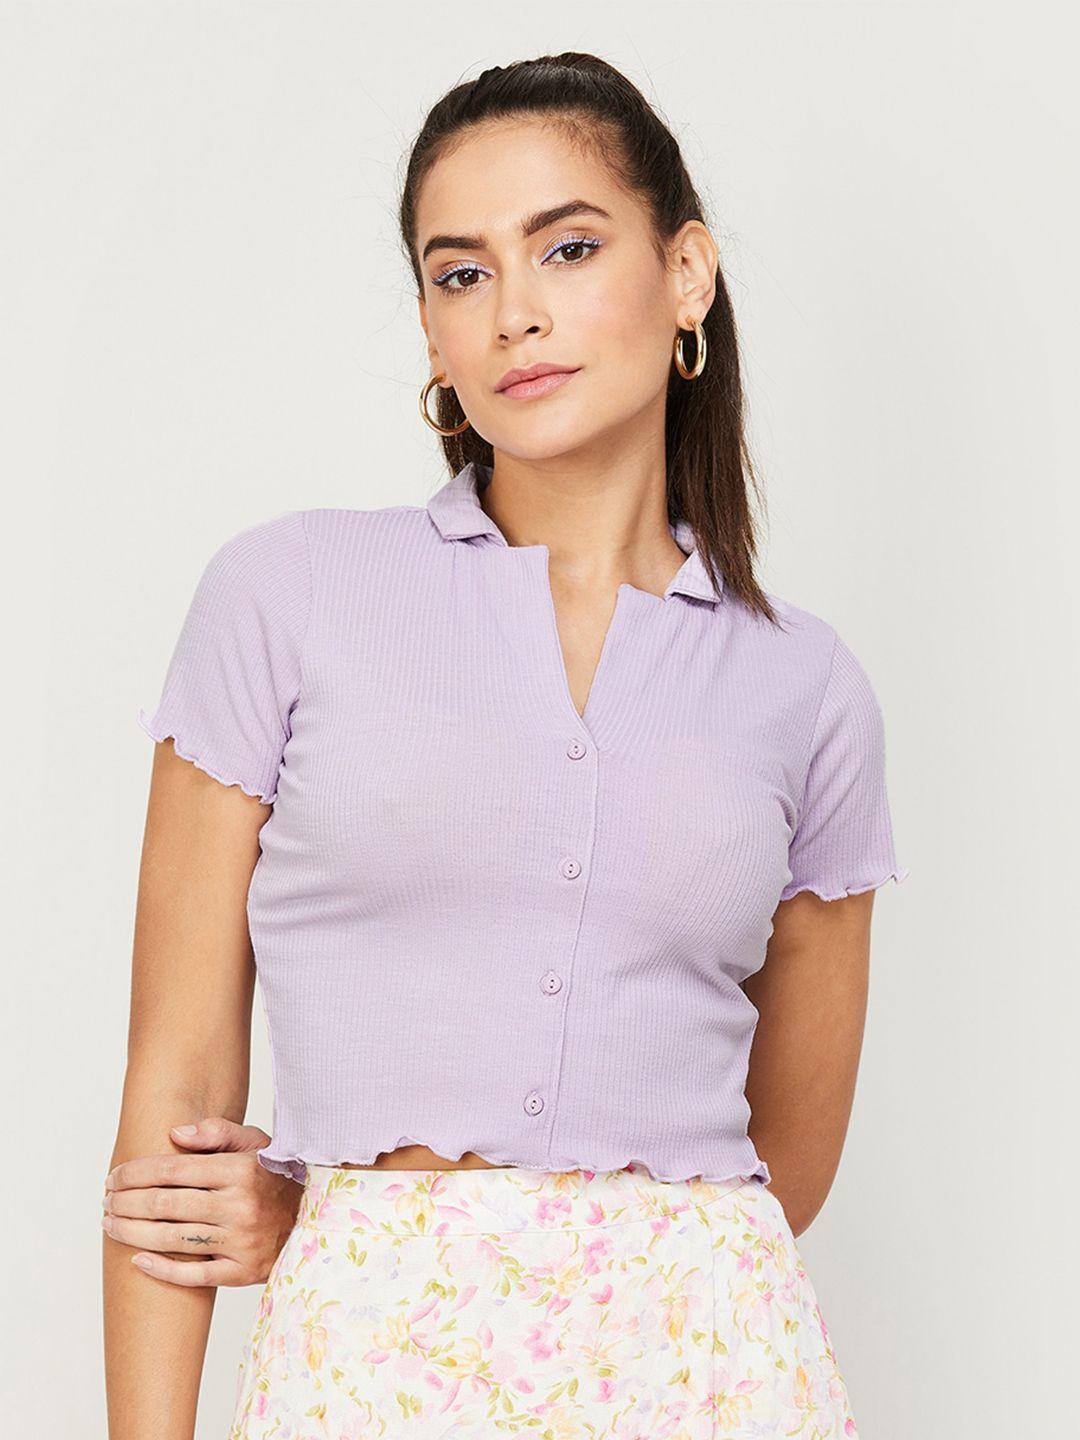 ginger by lifestyle shirt style crop top